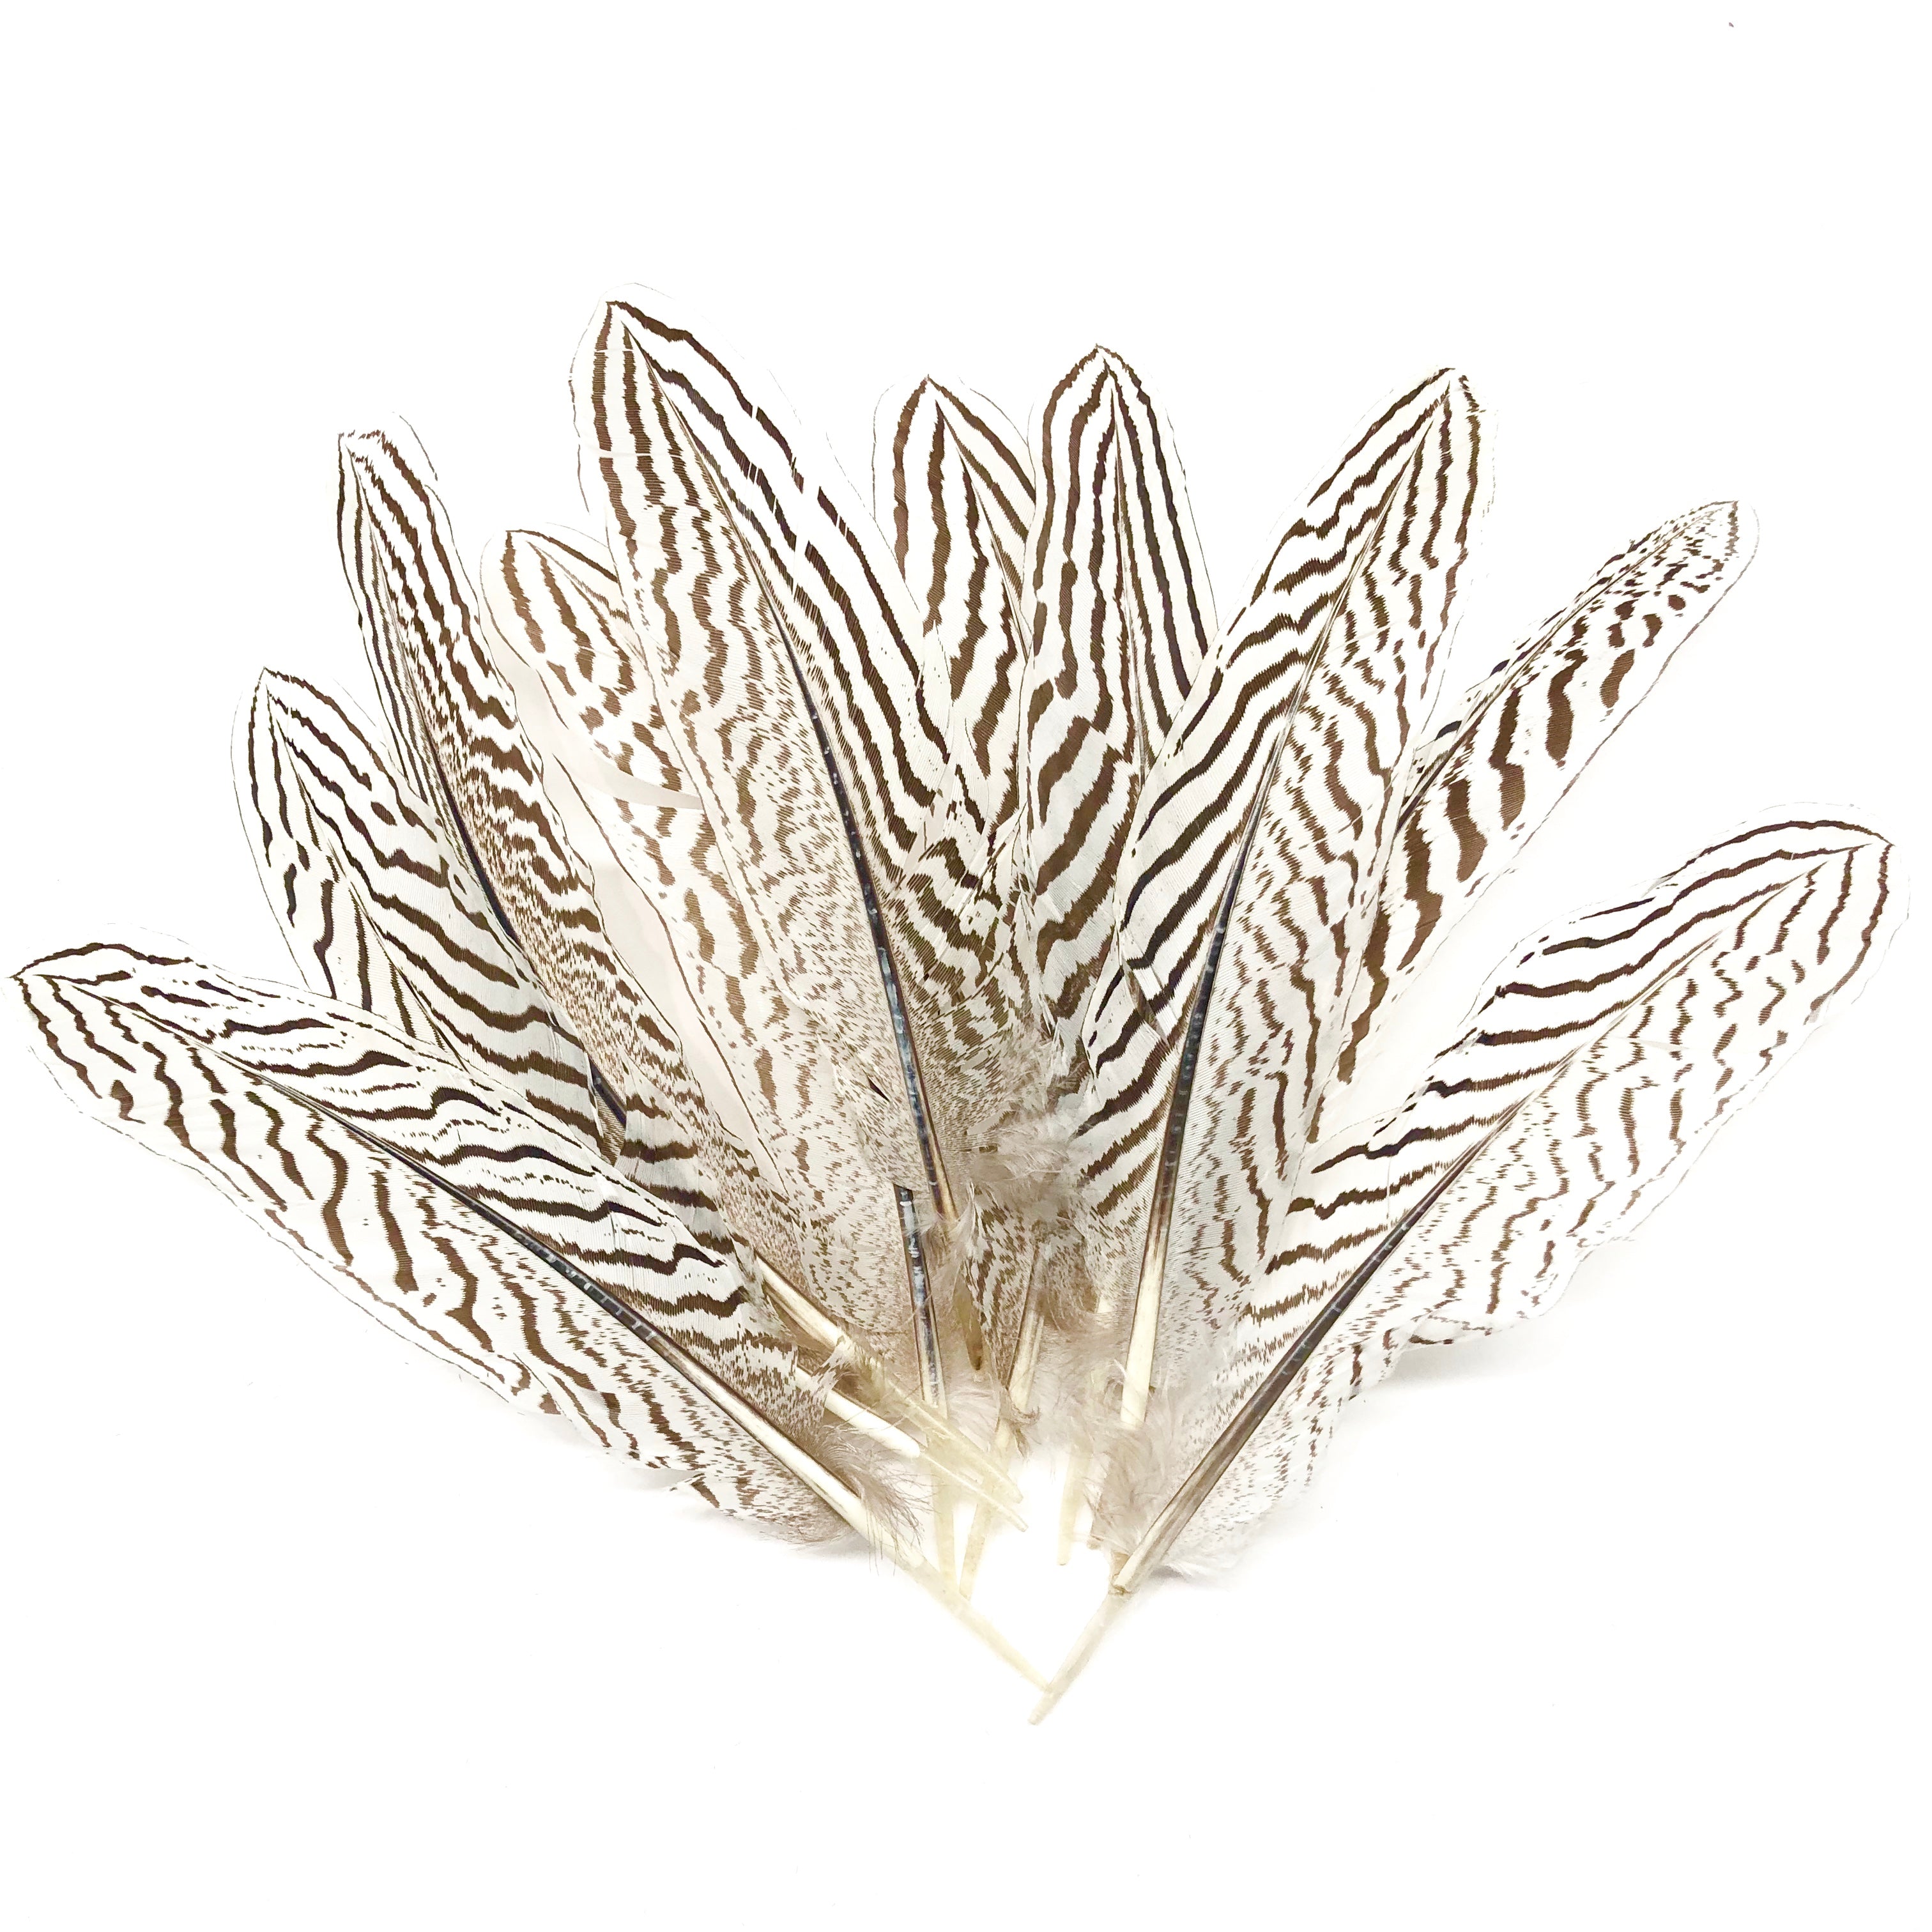 Natural 6 to 10" Silver Pheasant Amond Tail Feathers x 10 pcs